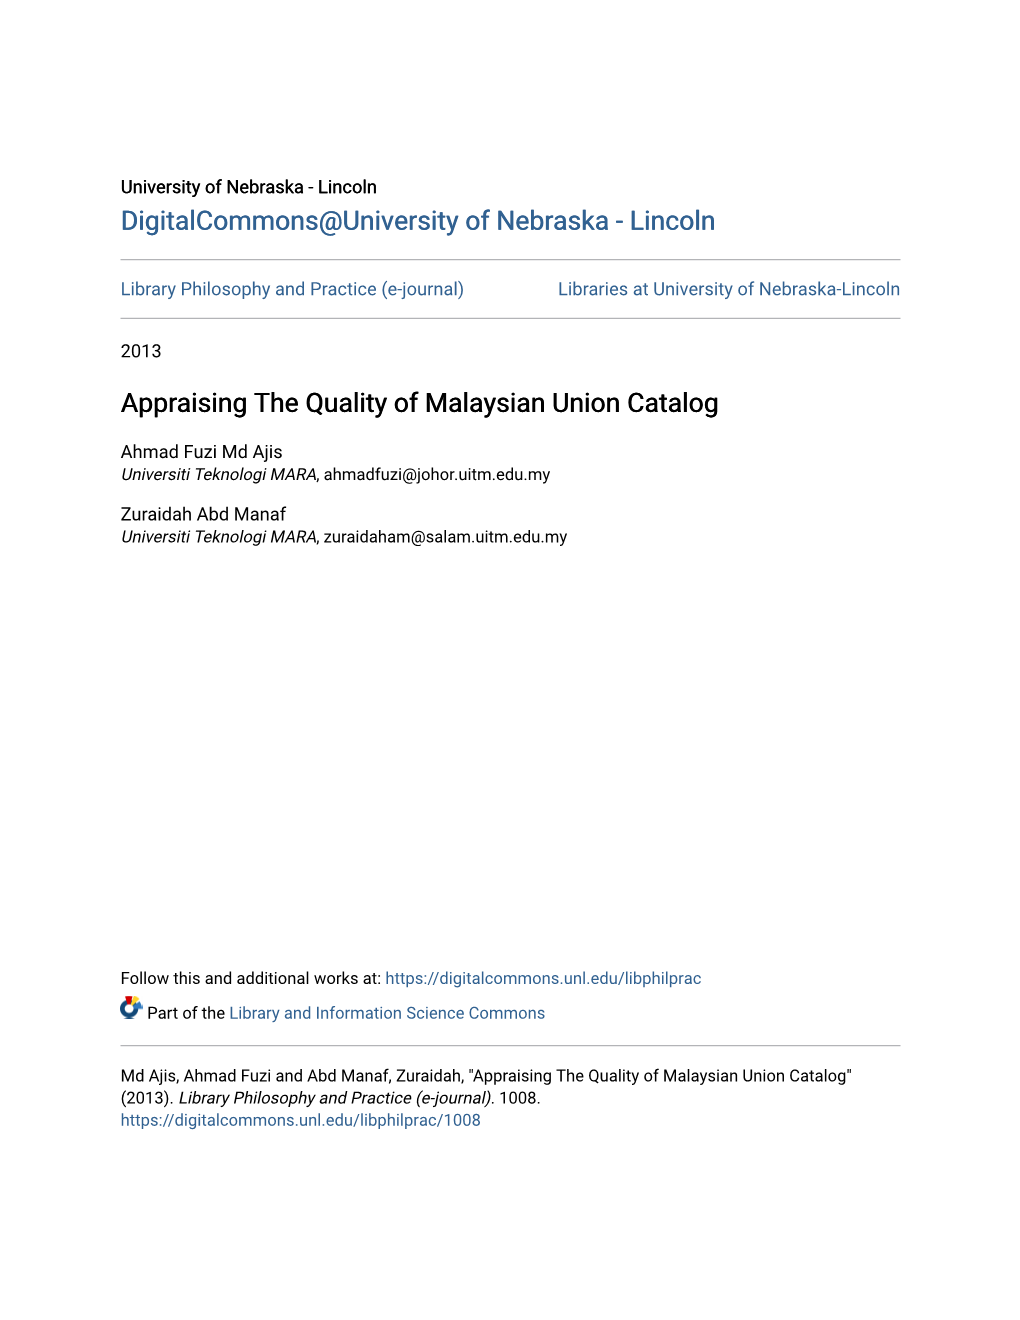 Appraising the Quality of Malaysian Union Catalog